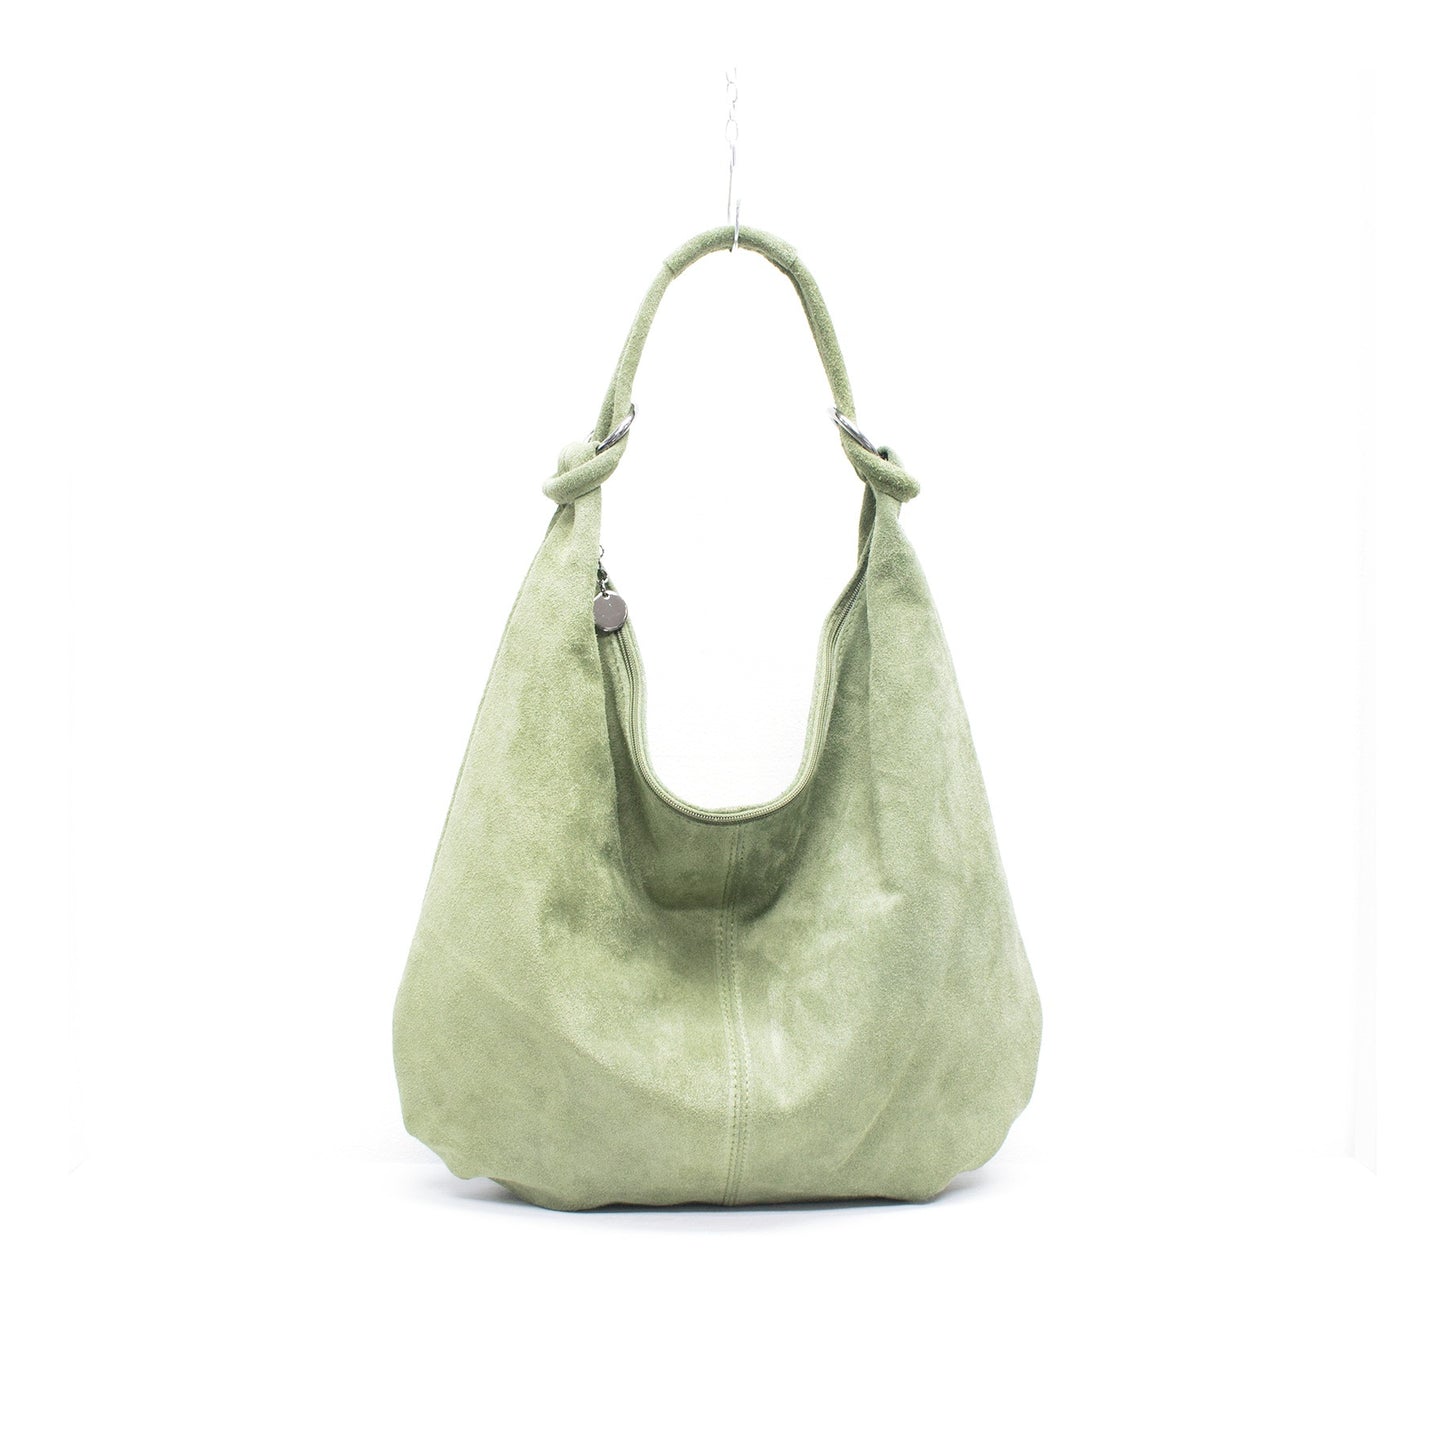 Genuine Suede Leather Large Hobo Shopper